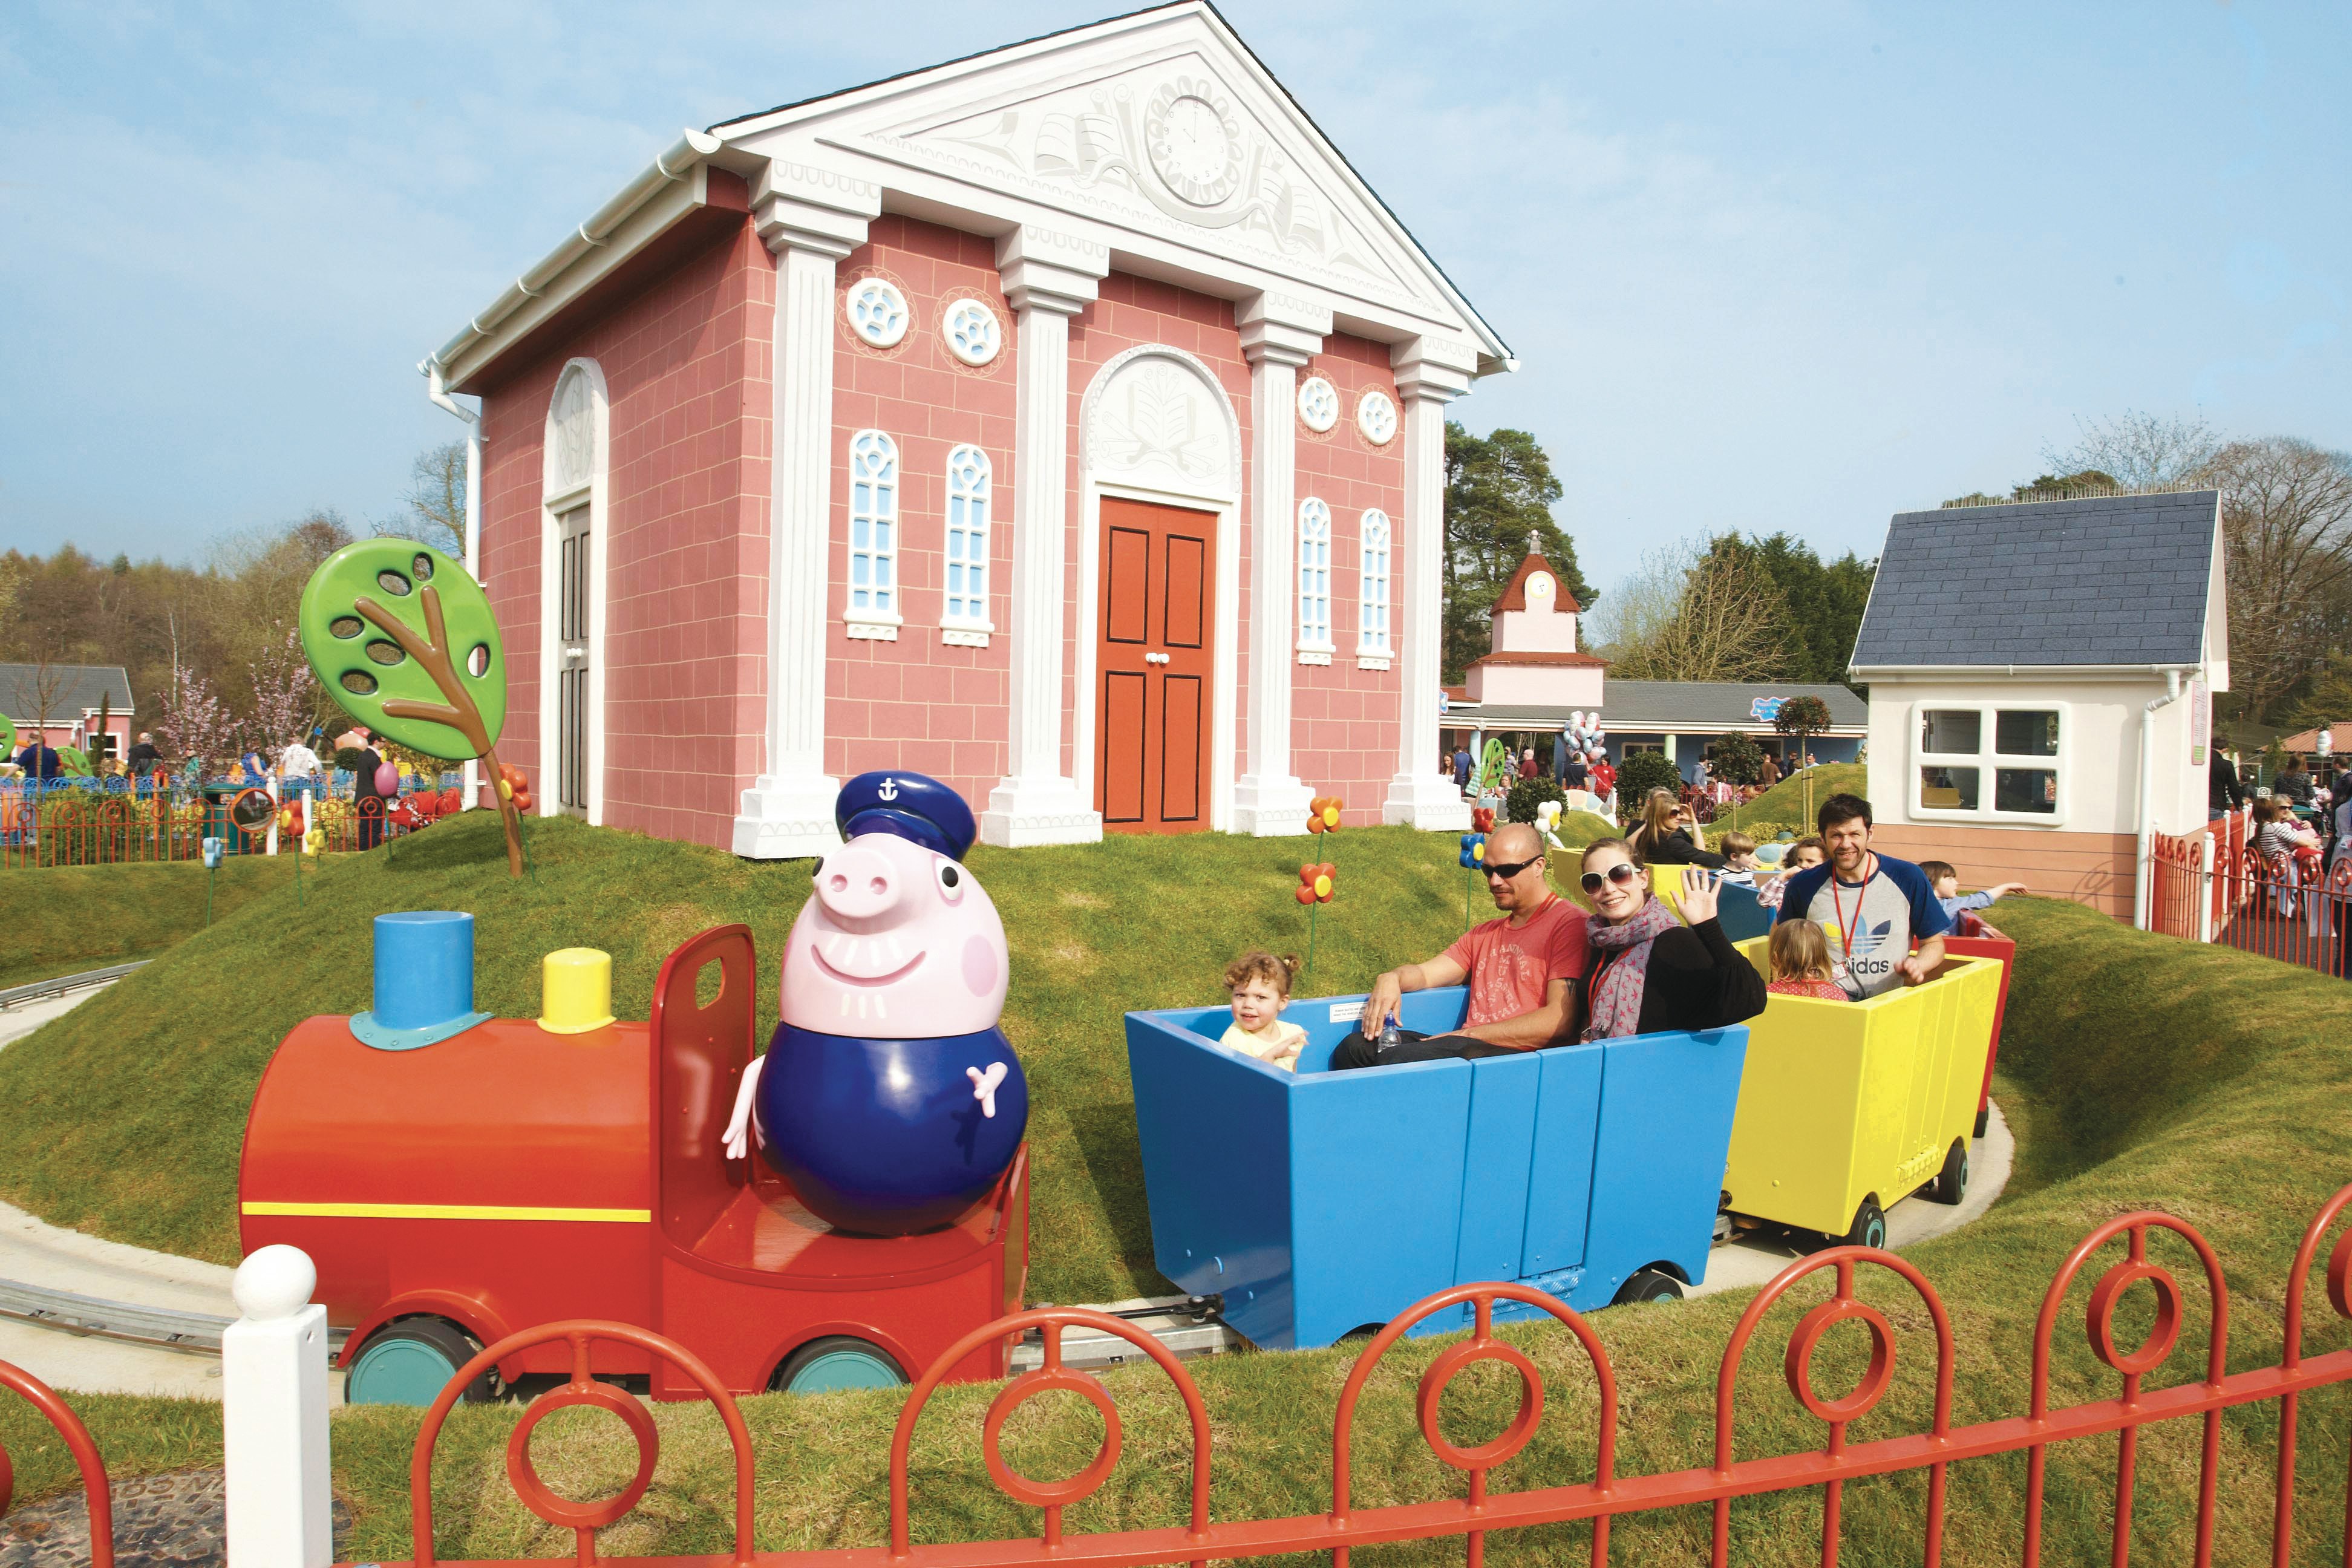 Your Ultimate Guide to the WORLD'S FIRST Peppa Pig Theme Park